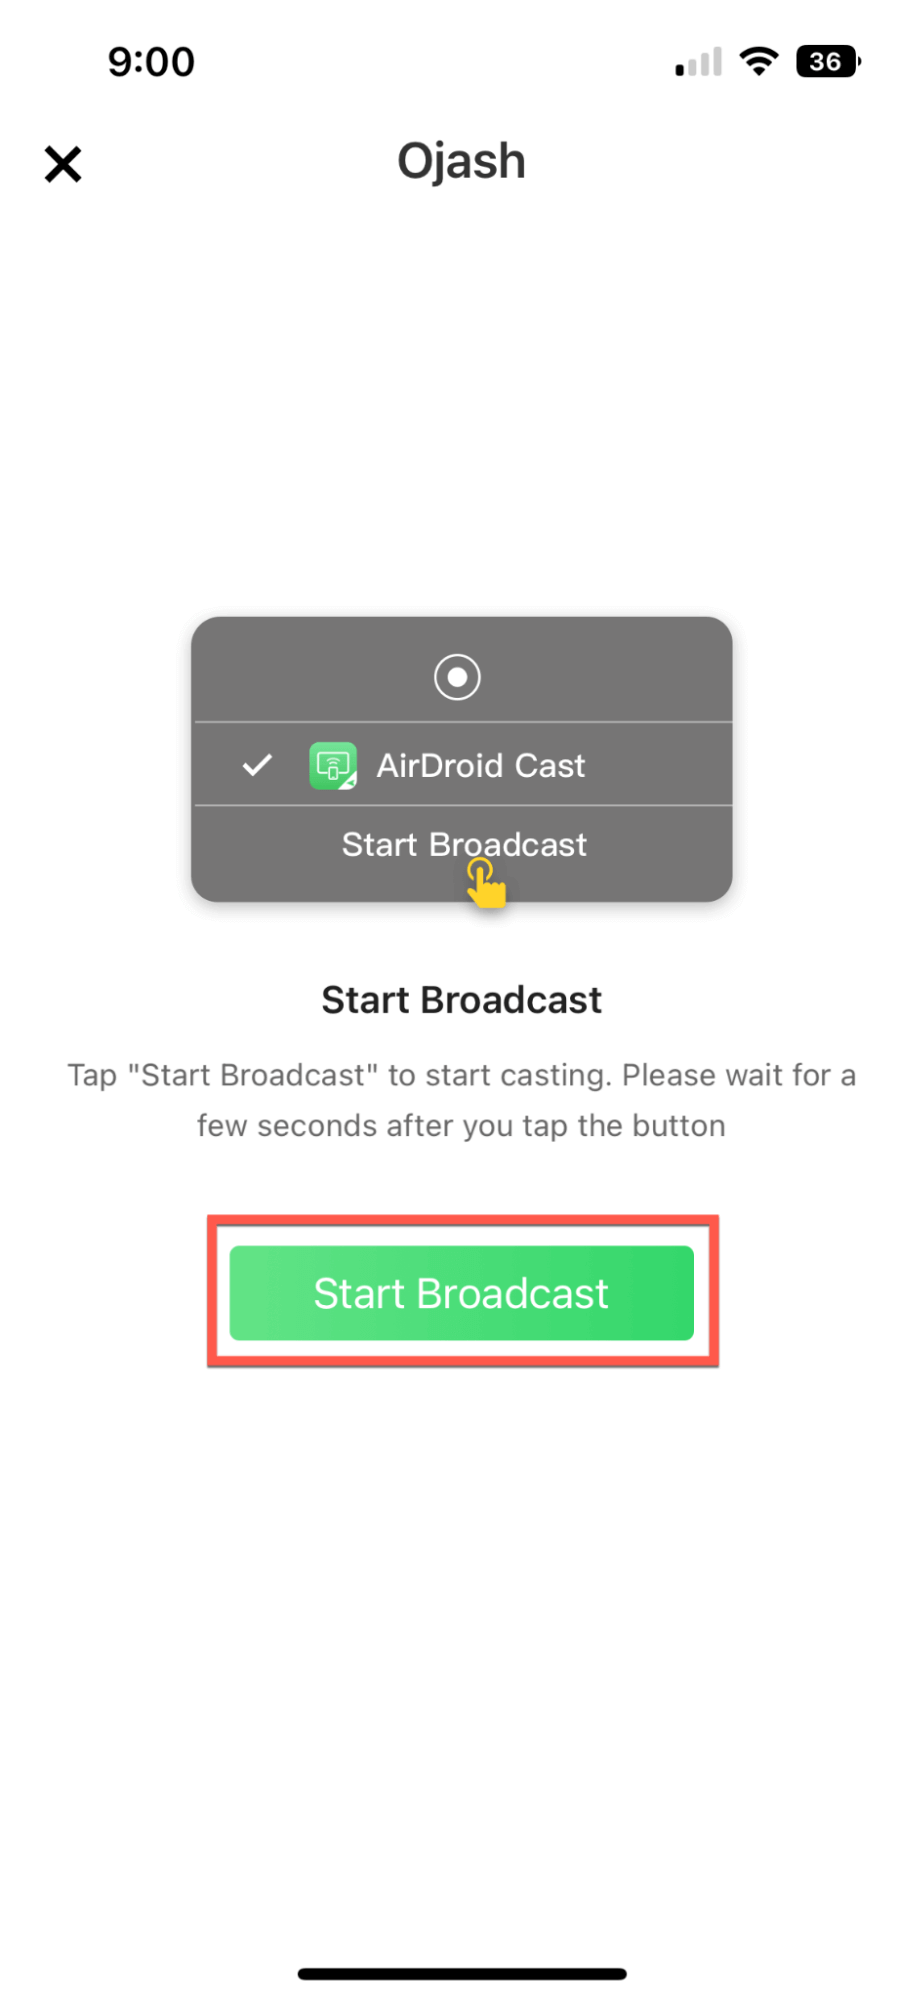 Tap on the Start Broadcast button